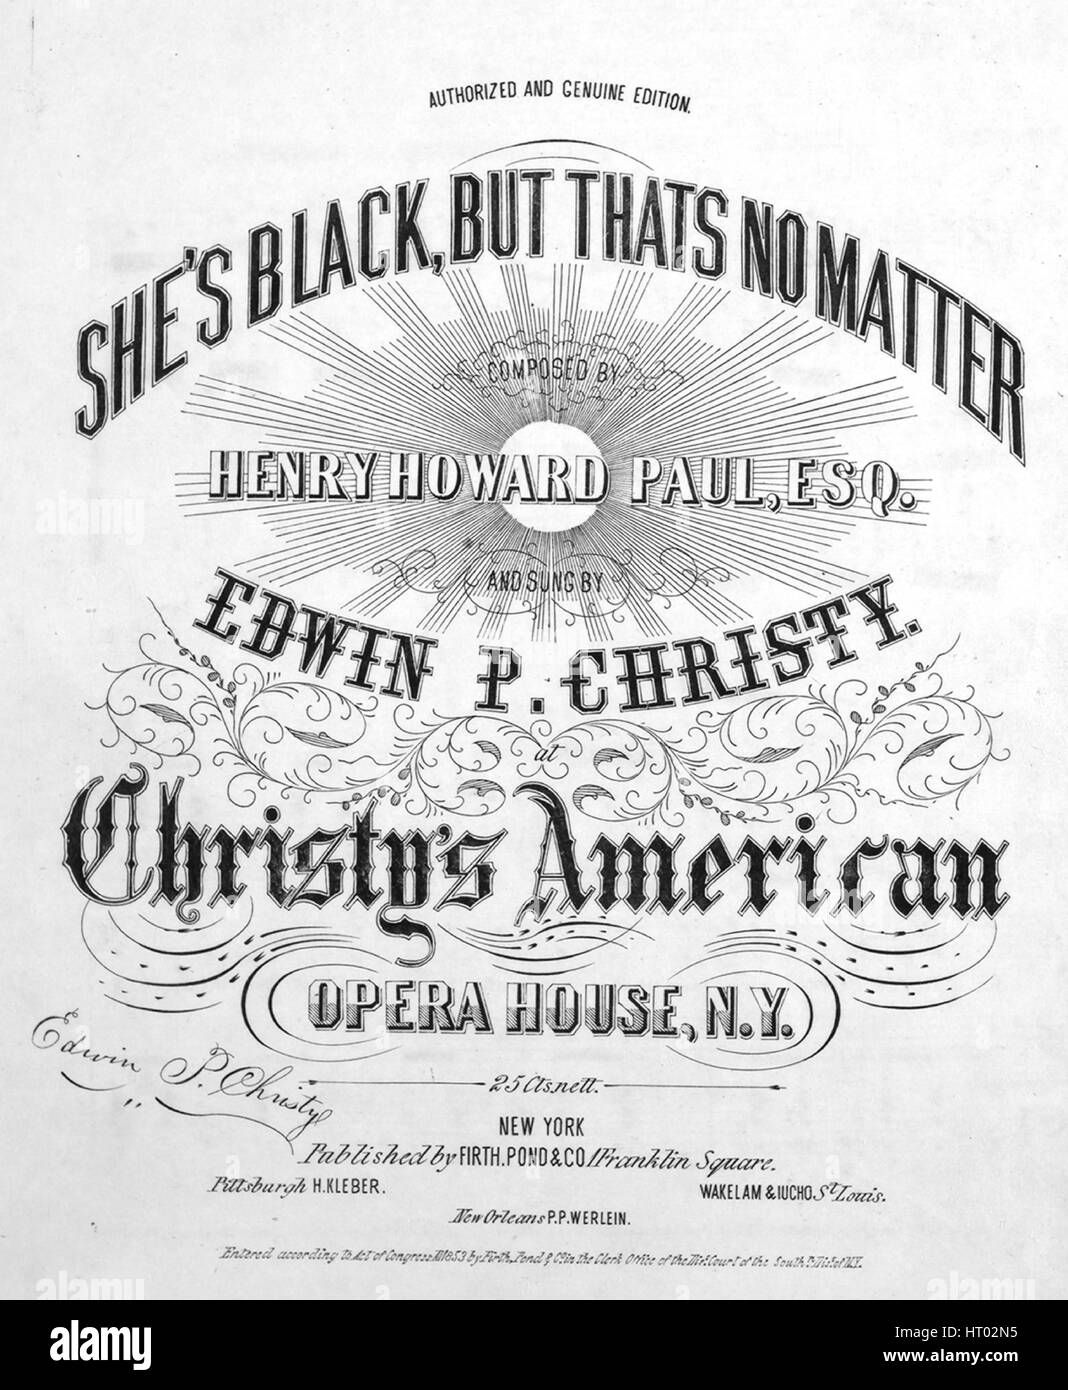 Sheet music cover image of the song 'She's Black, But Thats No Matter Authorized and Genuine Edition', with original authorship notes reading 'Composed by Henry Howard Paul, Esq', United States, 1853. The publisher is listed as 'Firth, Pond and Co., 1 Franklin Square', the form of composition is 'strophic with chorus', the instrumentation is 'piano and voice', the first line reads 'My Dinah, dear me, she's as beautiful quite as a star that shines calmly at close of the night', and the illustration artist is listed as 'Quidor Engvr.'. Stock Photo